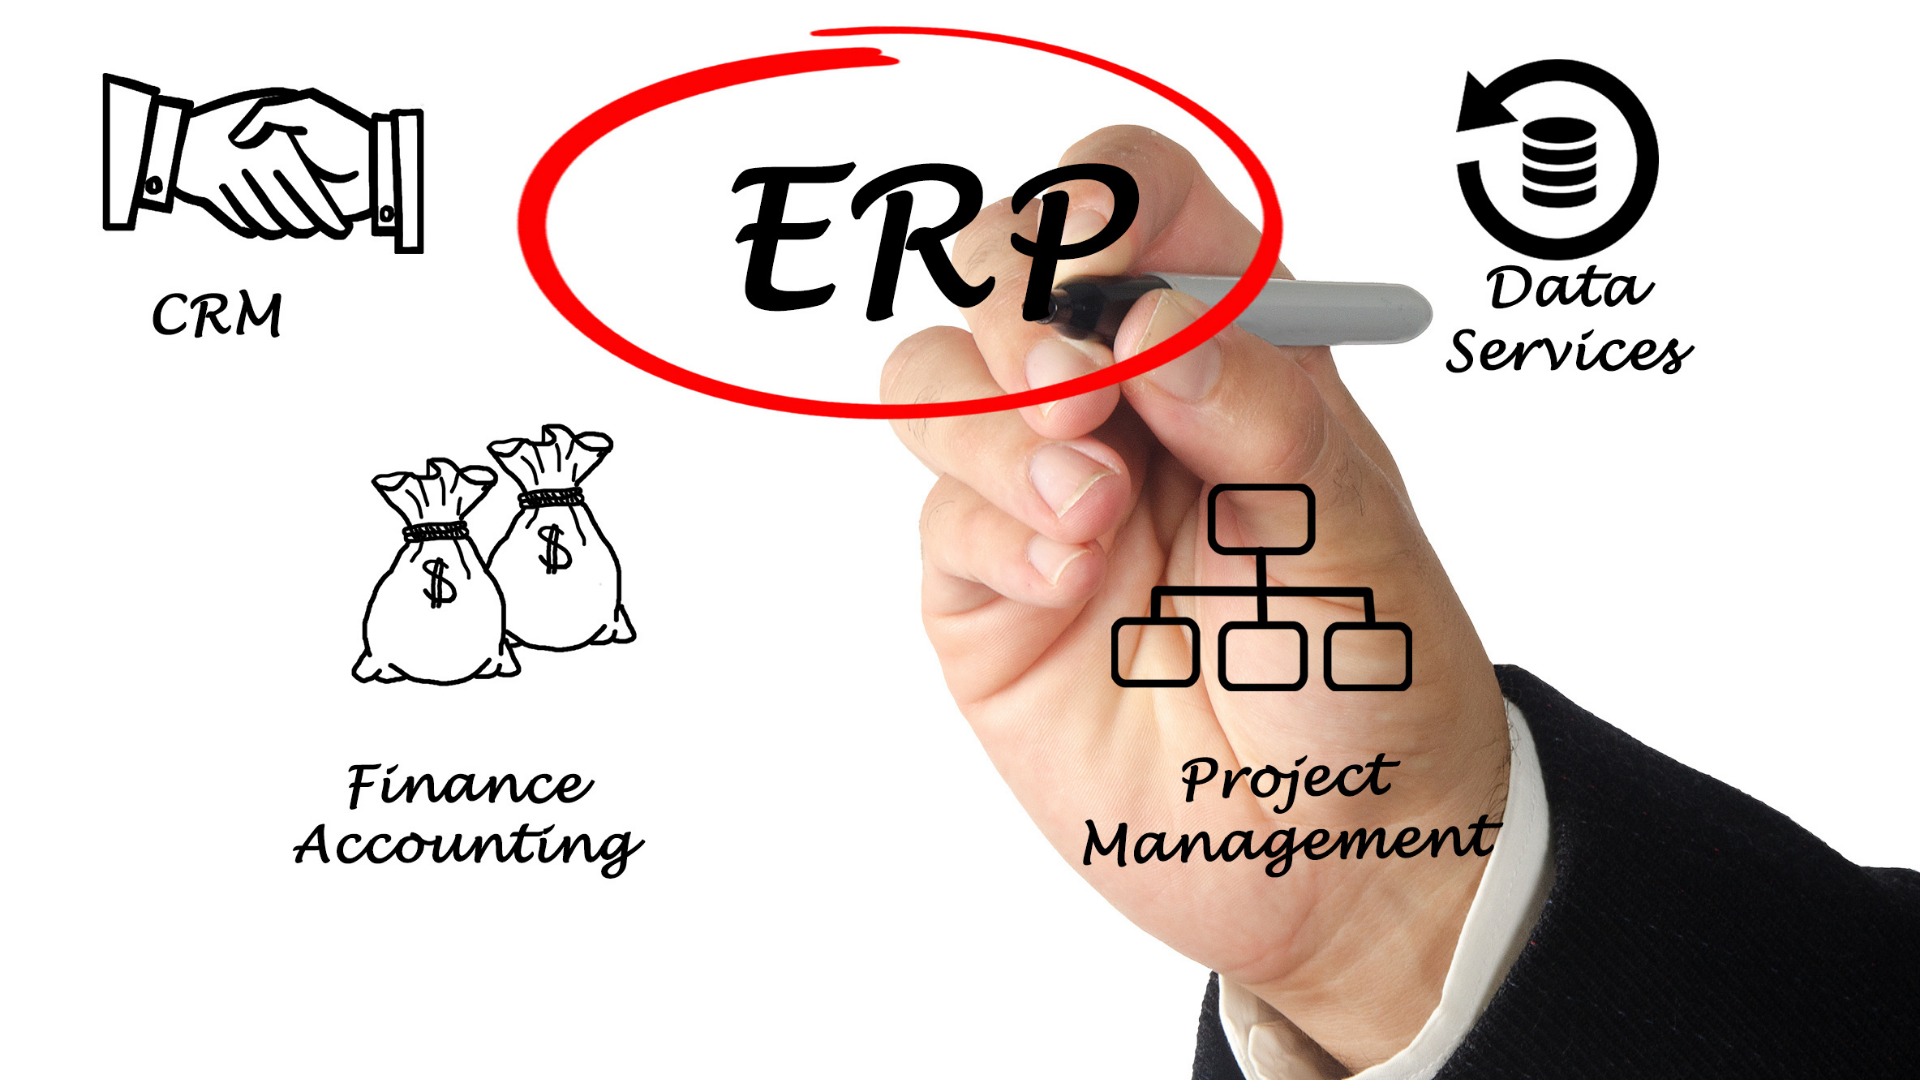 What is ERP (Enterprise Resource Planning)?